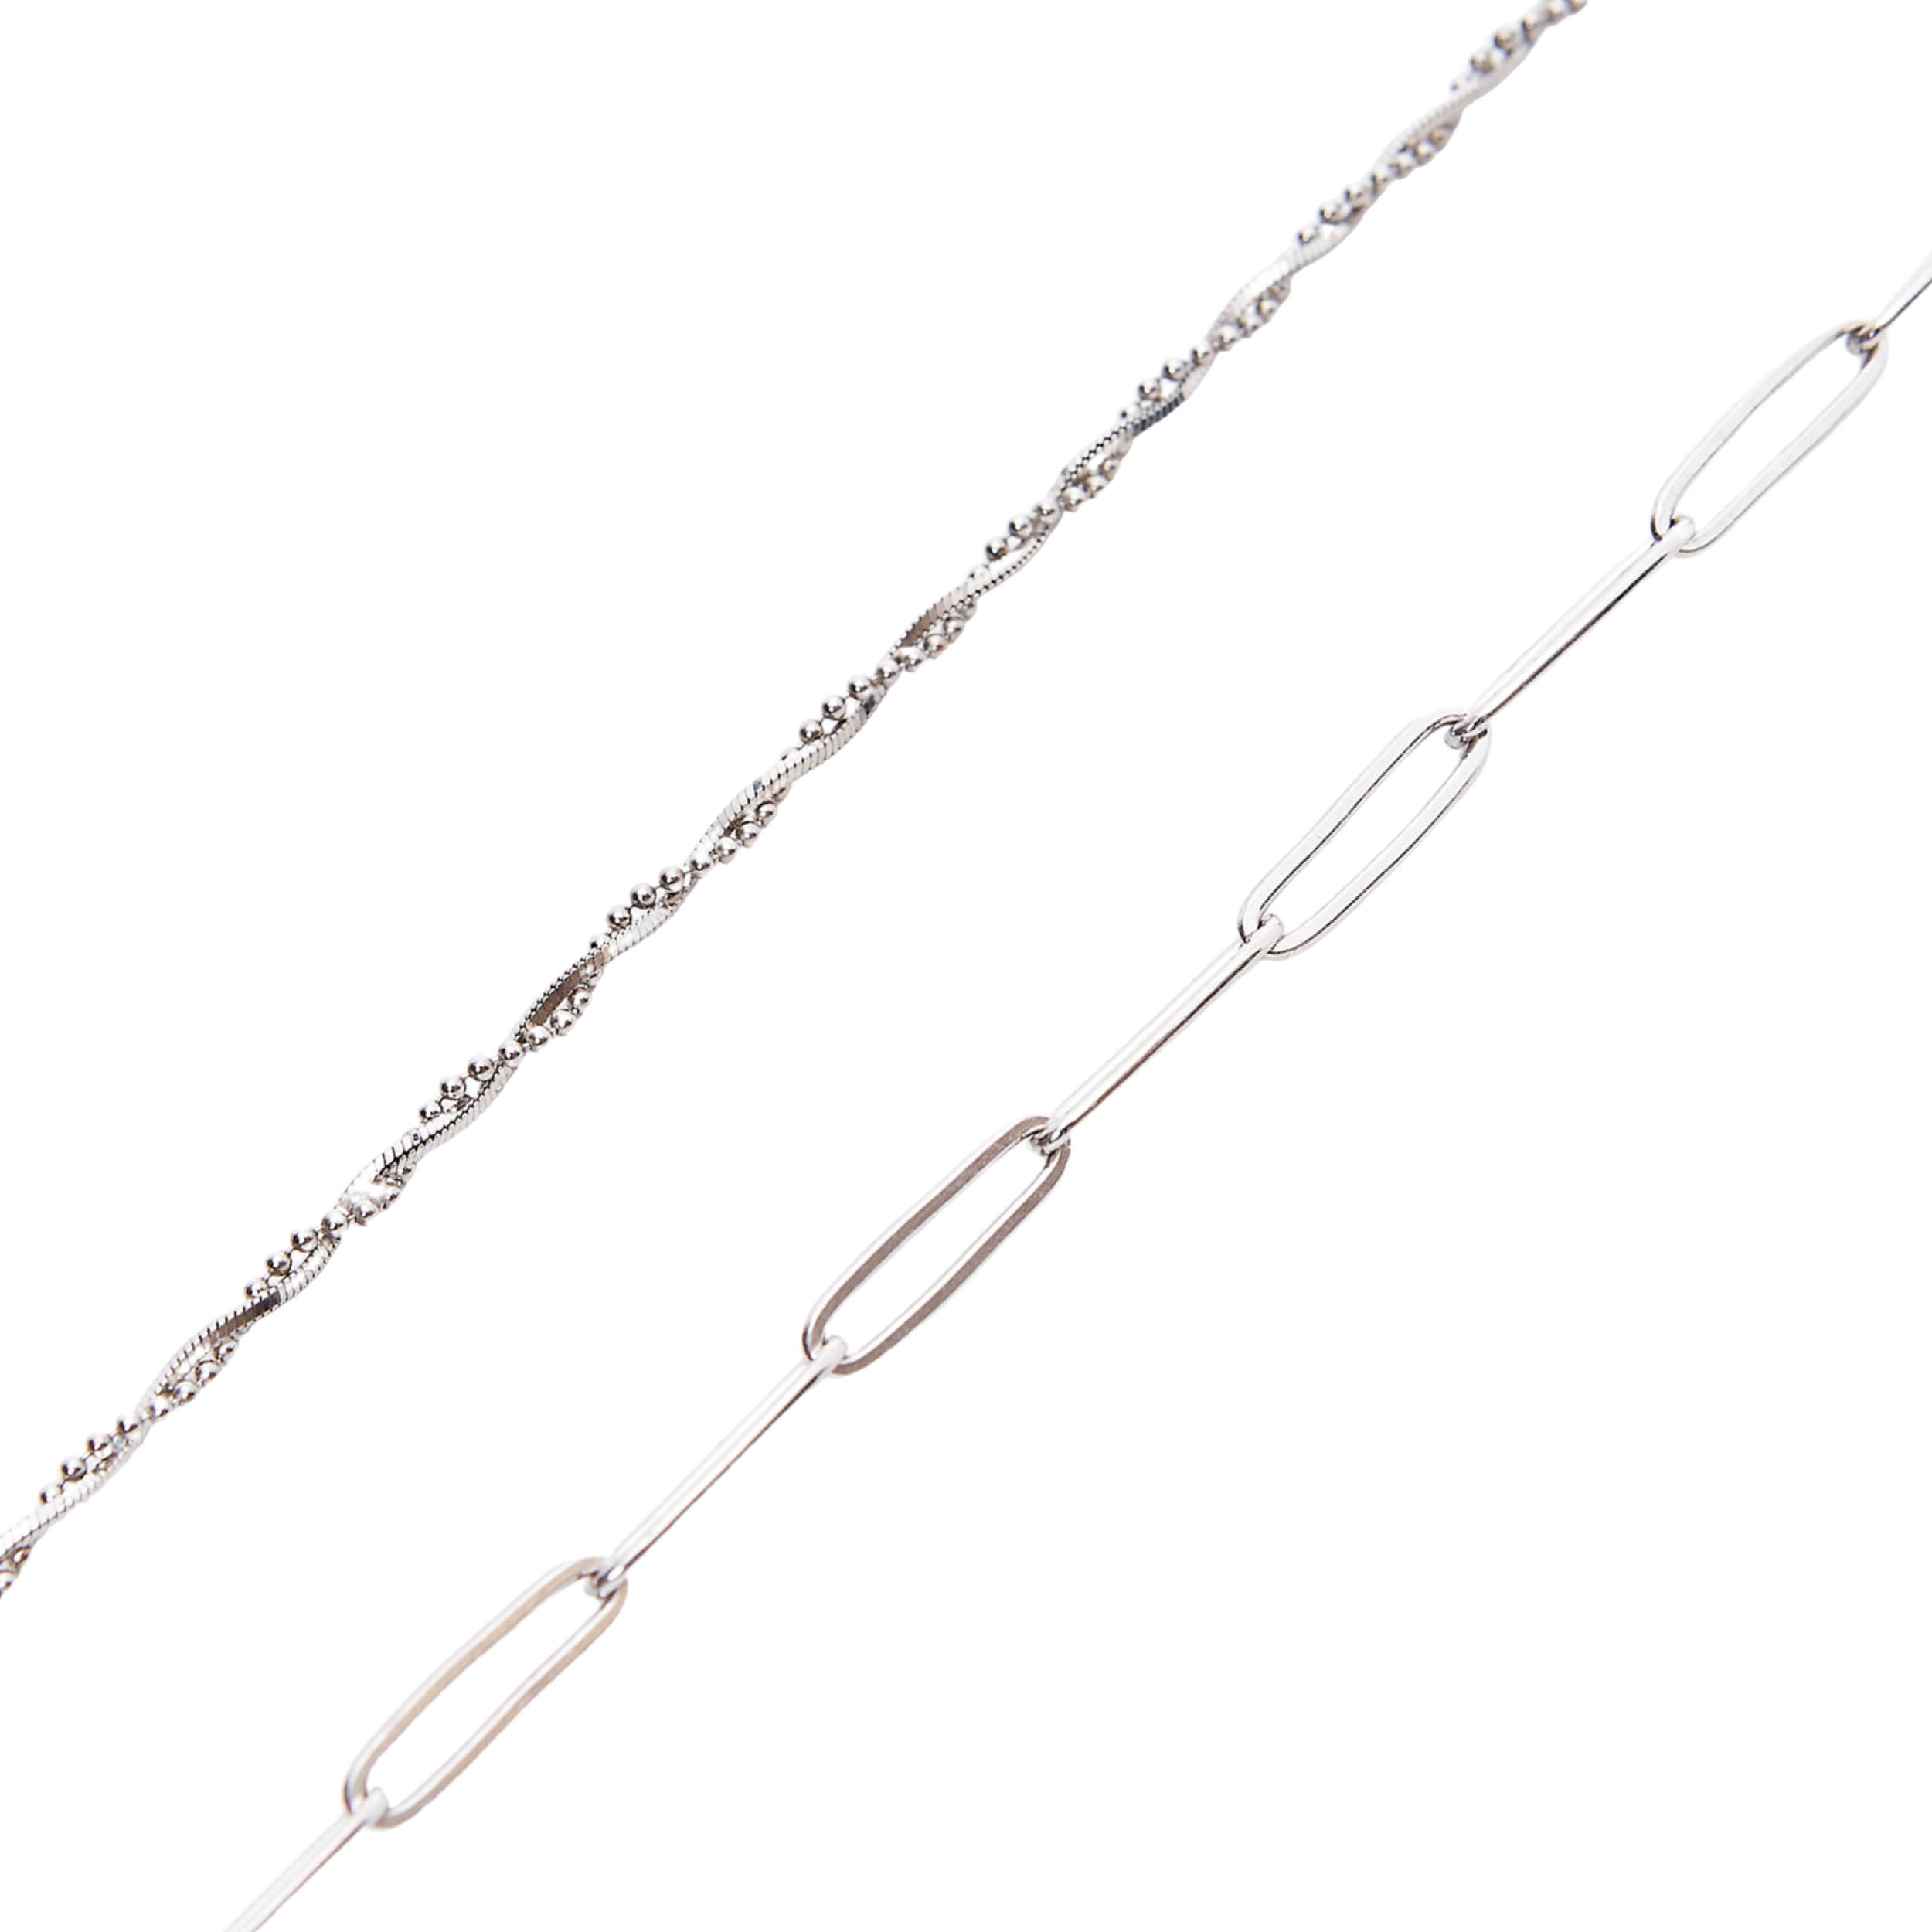 Bead Chain Twisted and Large Rectangular Chain Sterling Silver Bracelet Set